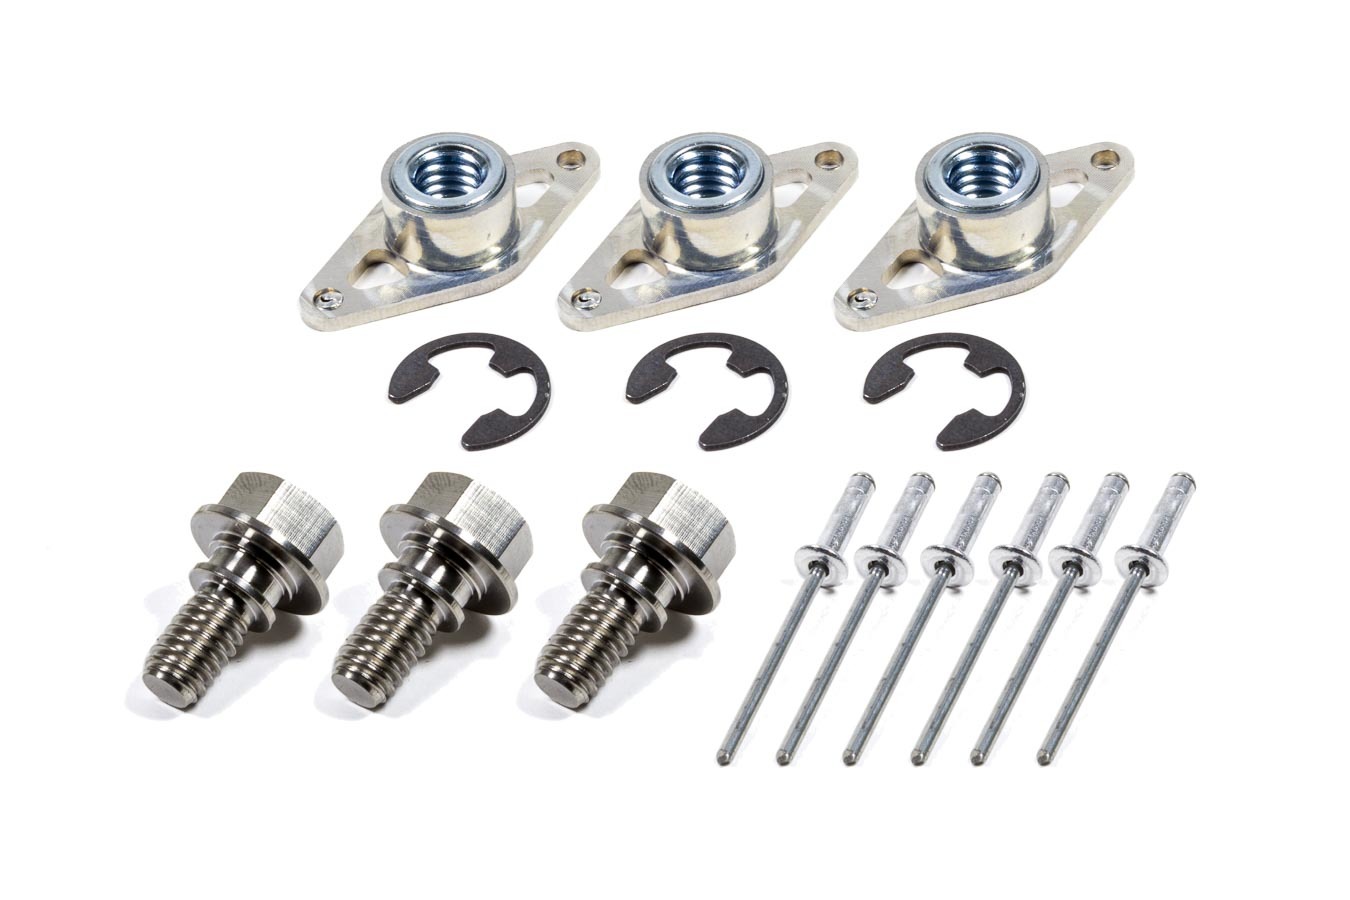 Triple X Race Components SC-WH-7841 Mud Cover Installation Kit, Screw-In Inserts / Rivets Included, 1-3/8 in Spring, Titanium, Kit